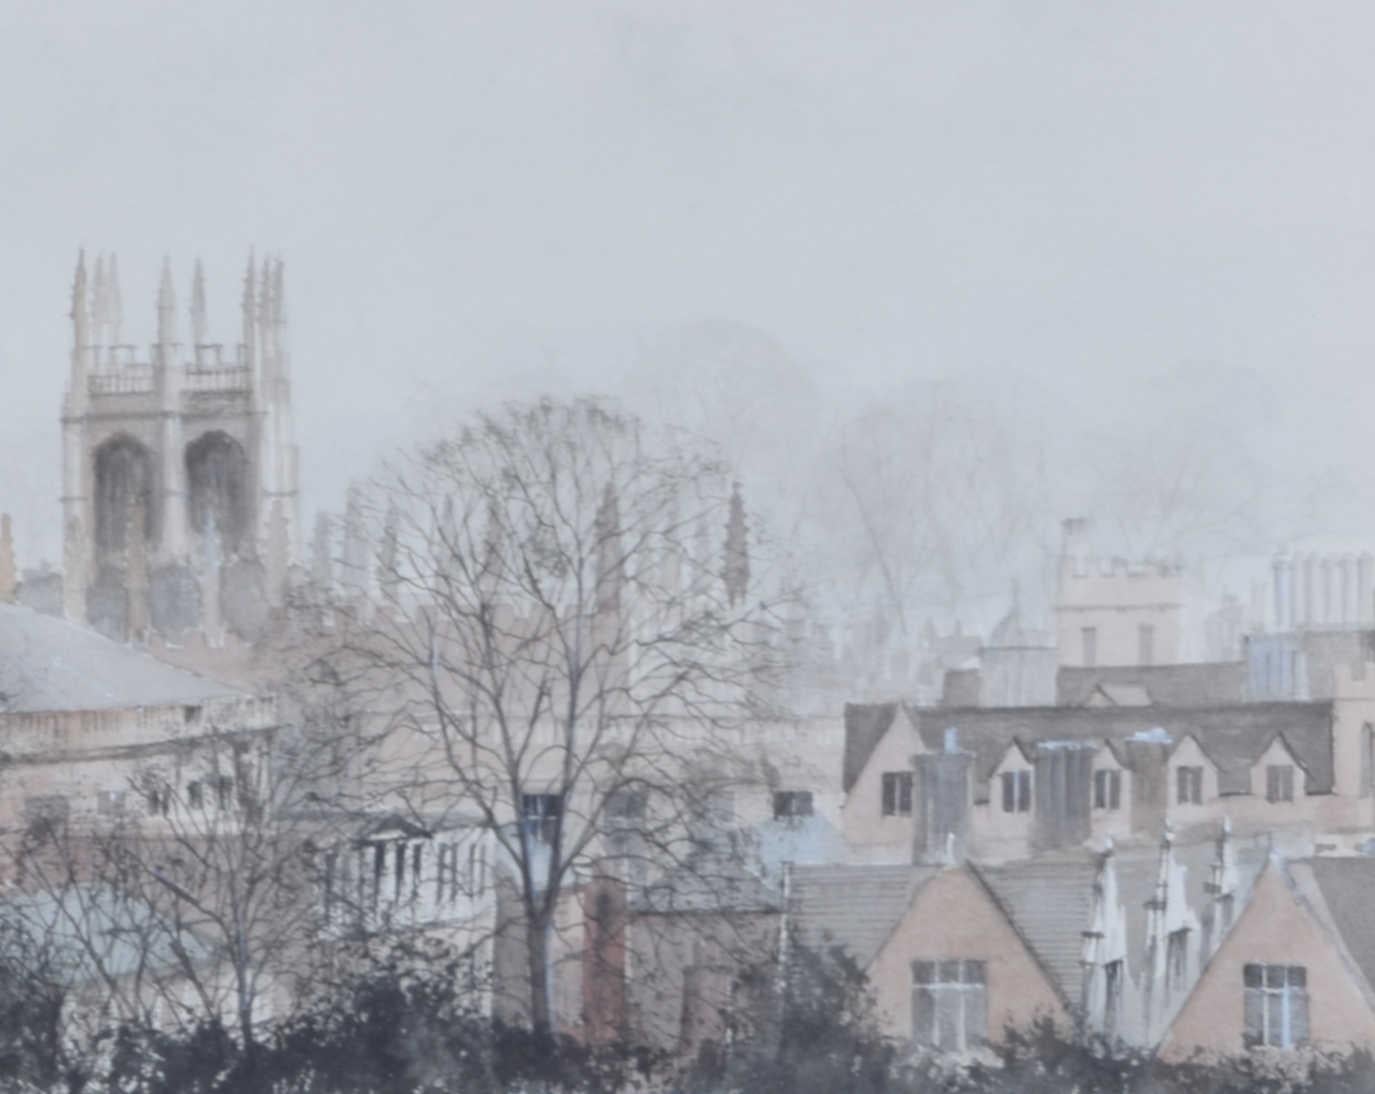 To see our other views of Oxford and Cambridge, scroll down to 